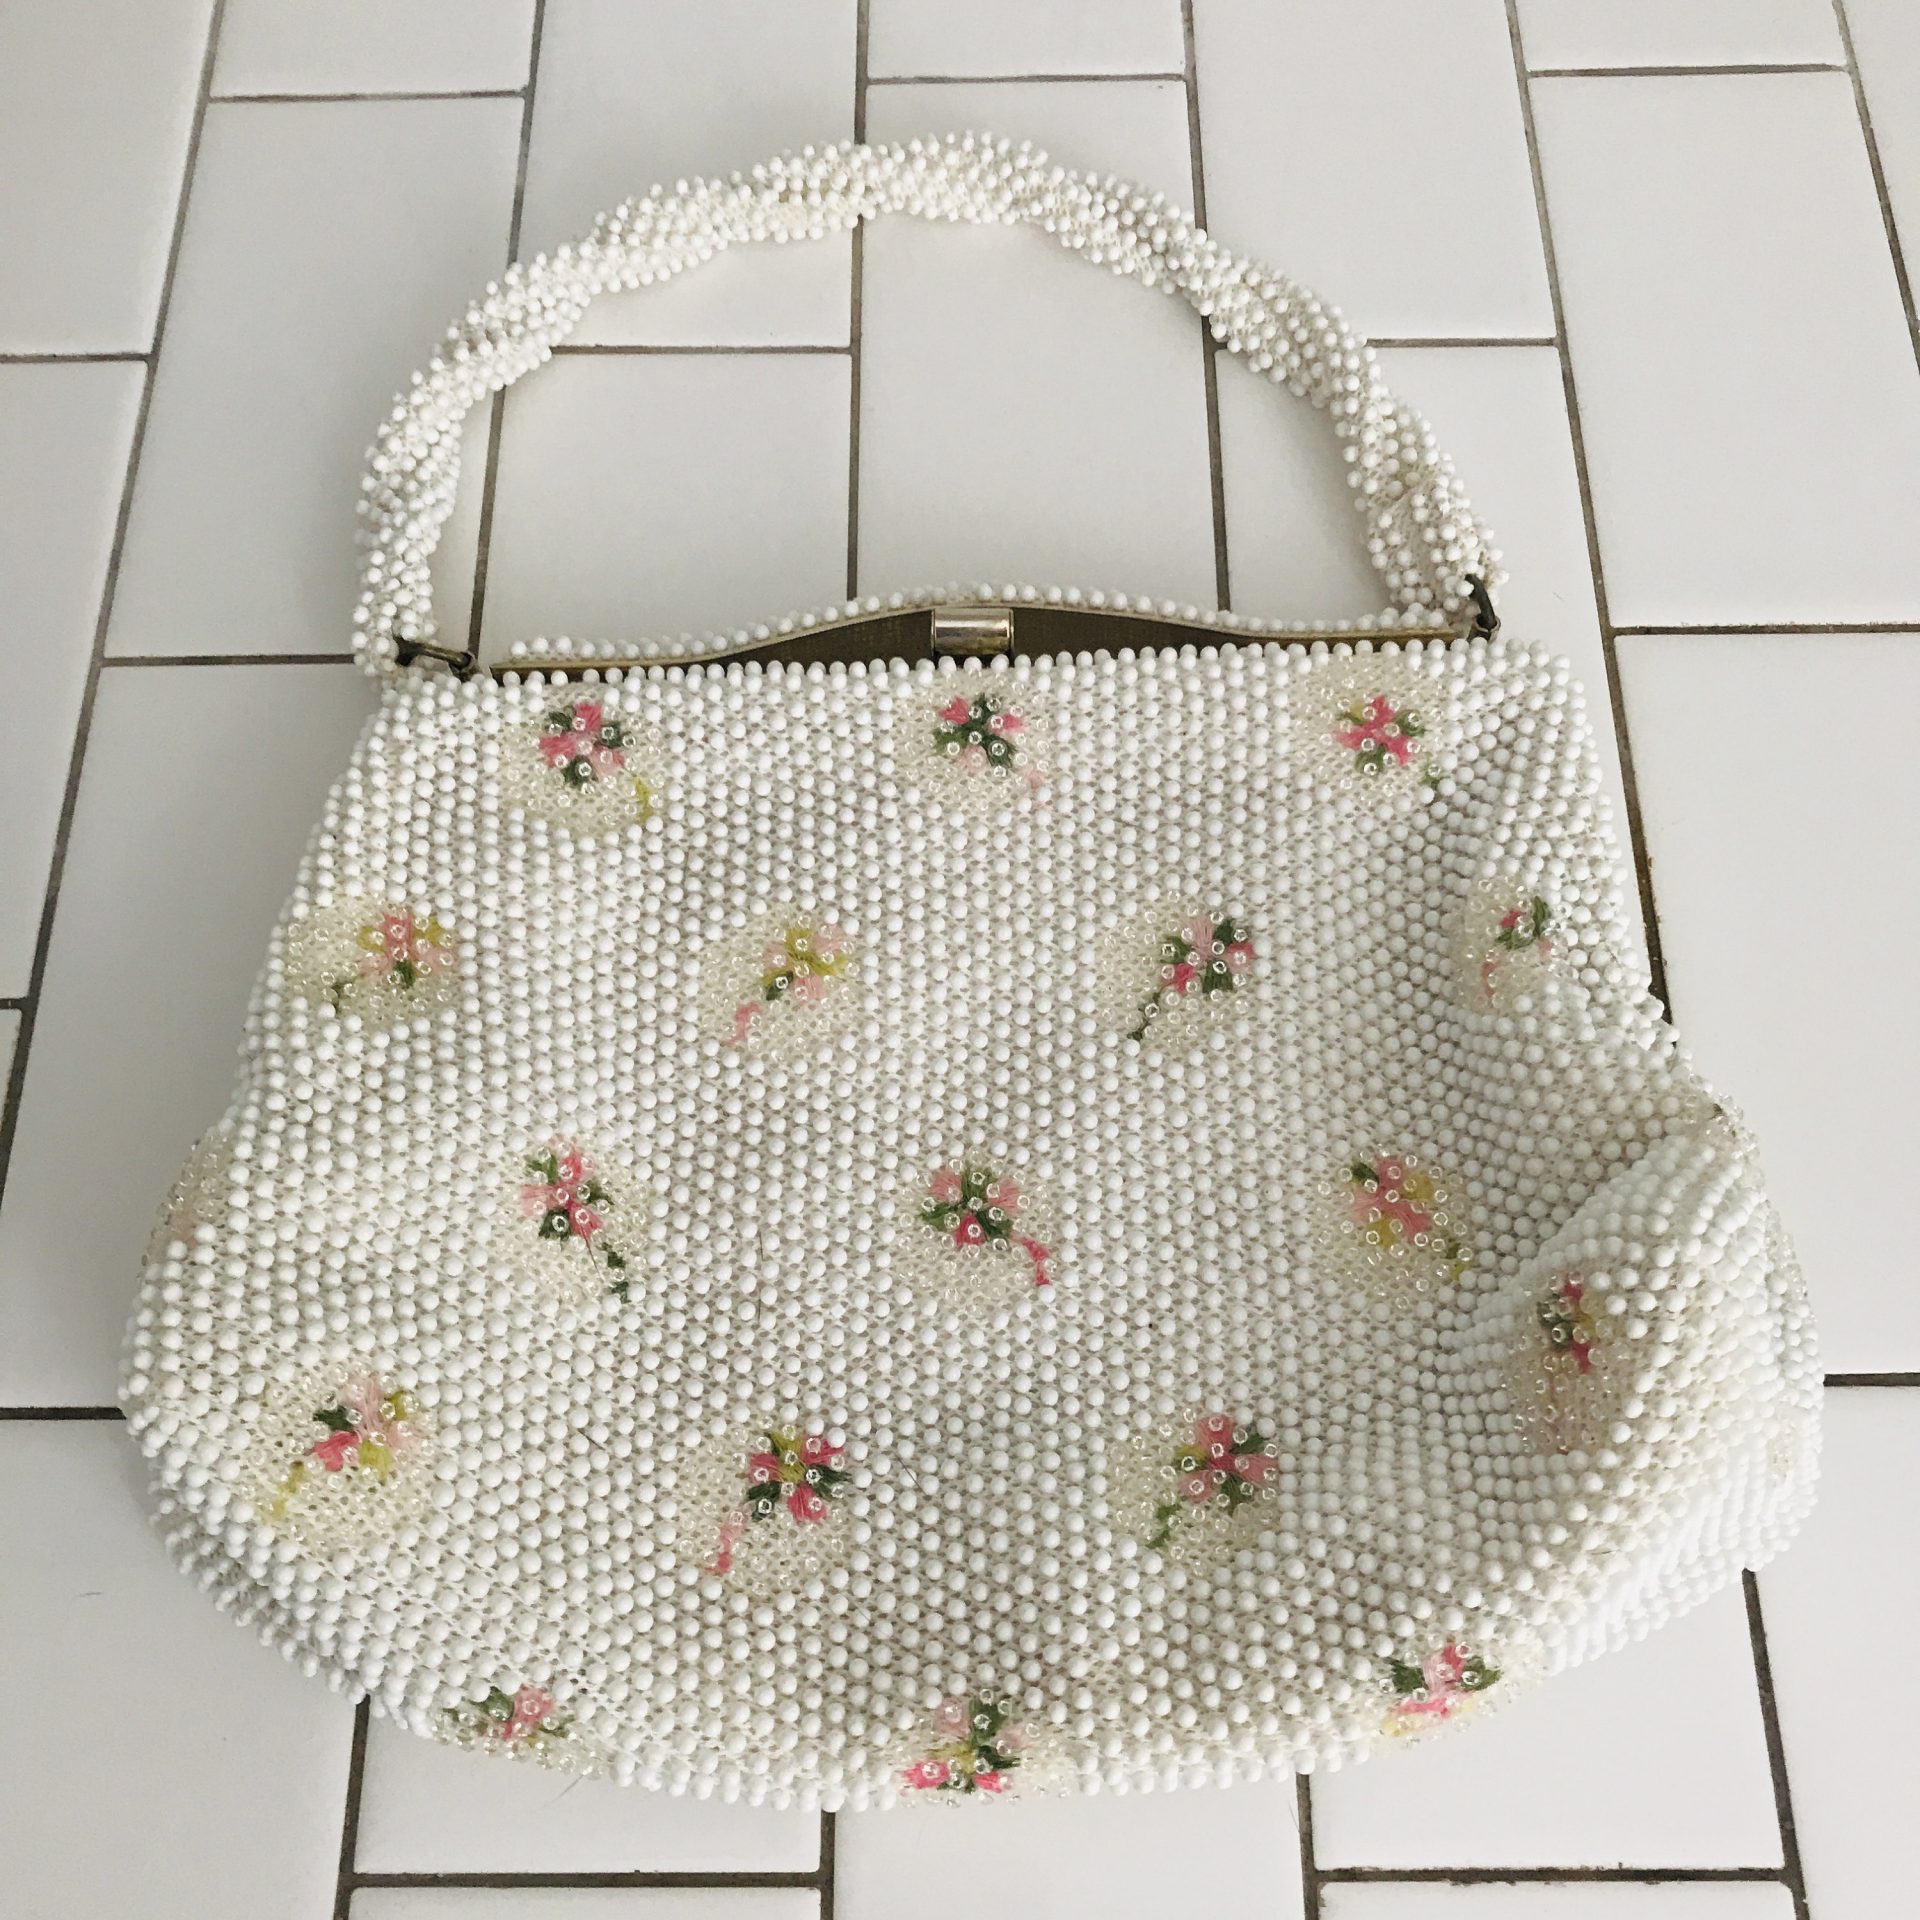 Vintage Purse Lumured Cordé Beaded Floral pattern beads white with ...